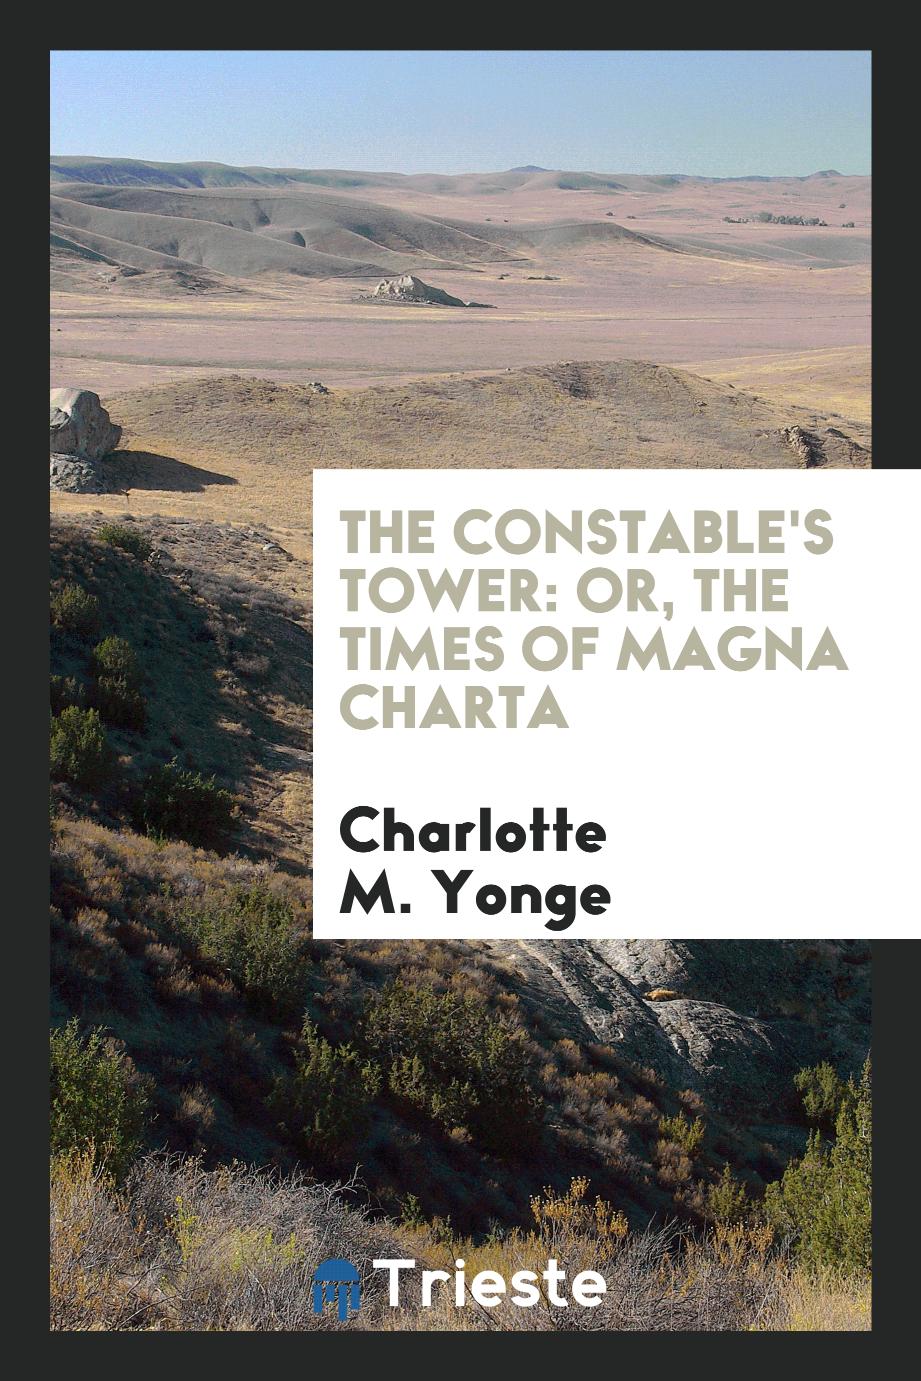 The constable's tower: or, The times of Magna Charta